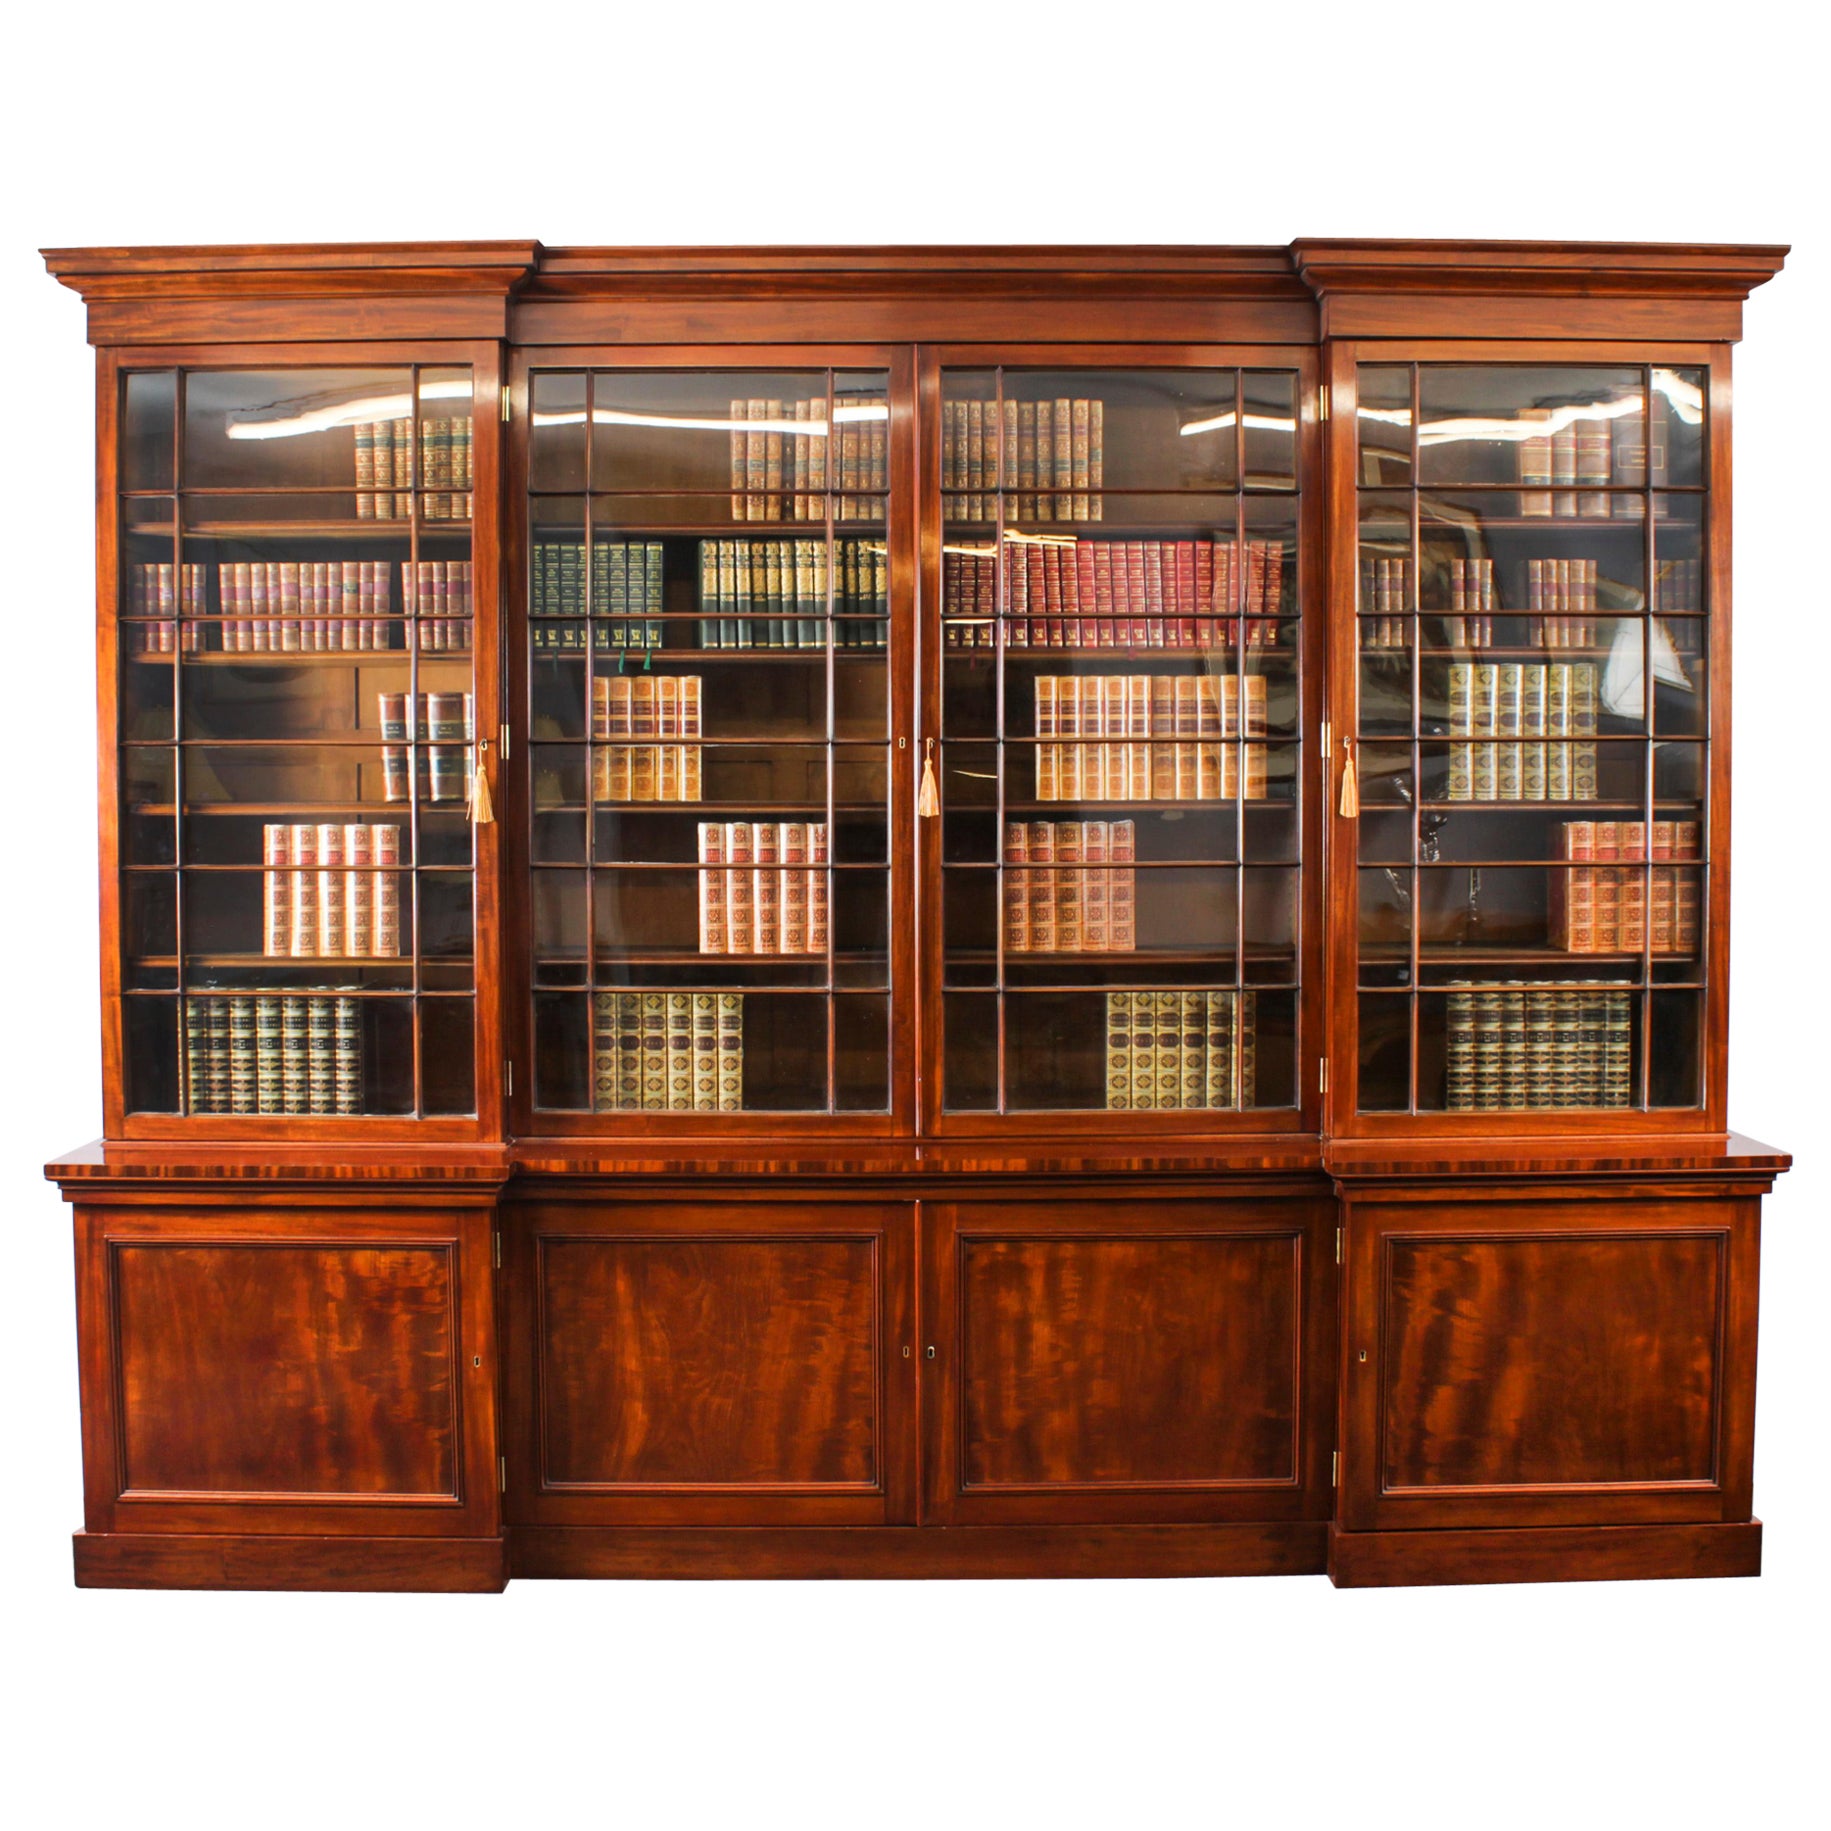 Antique English William IV Flame Mahogany Library Breakfront Bookcase 19th C For Sale